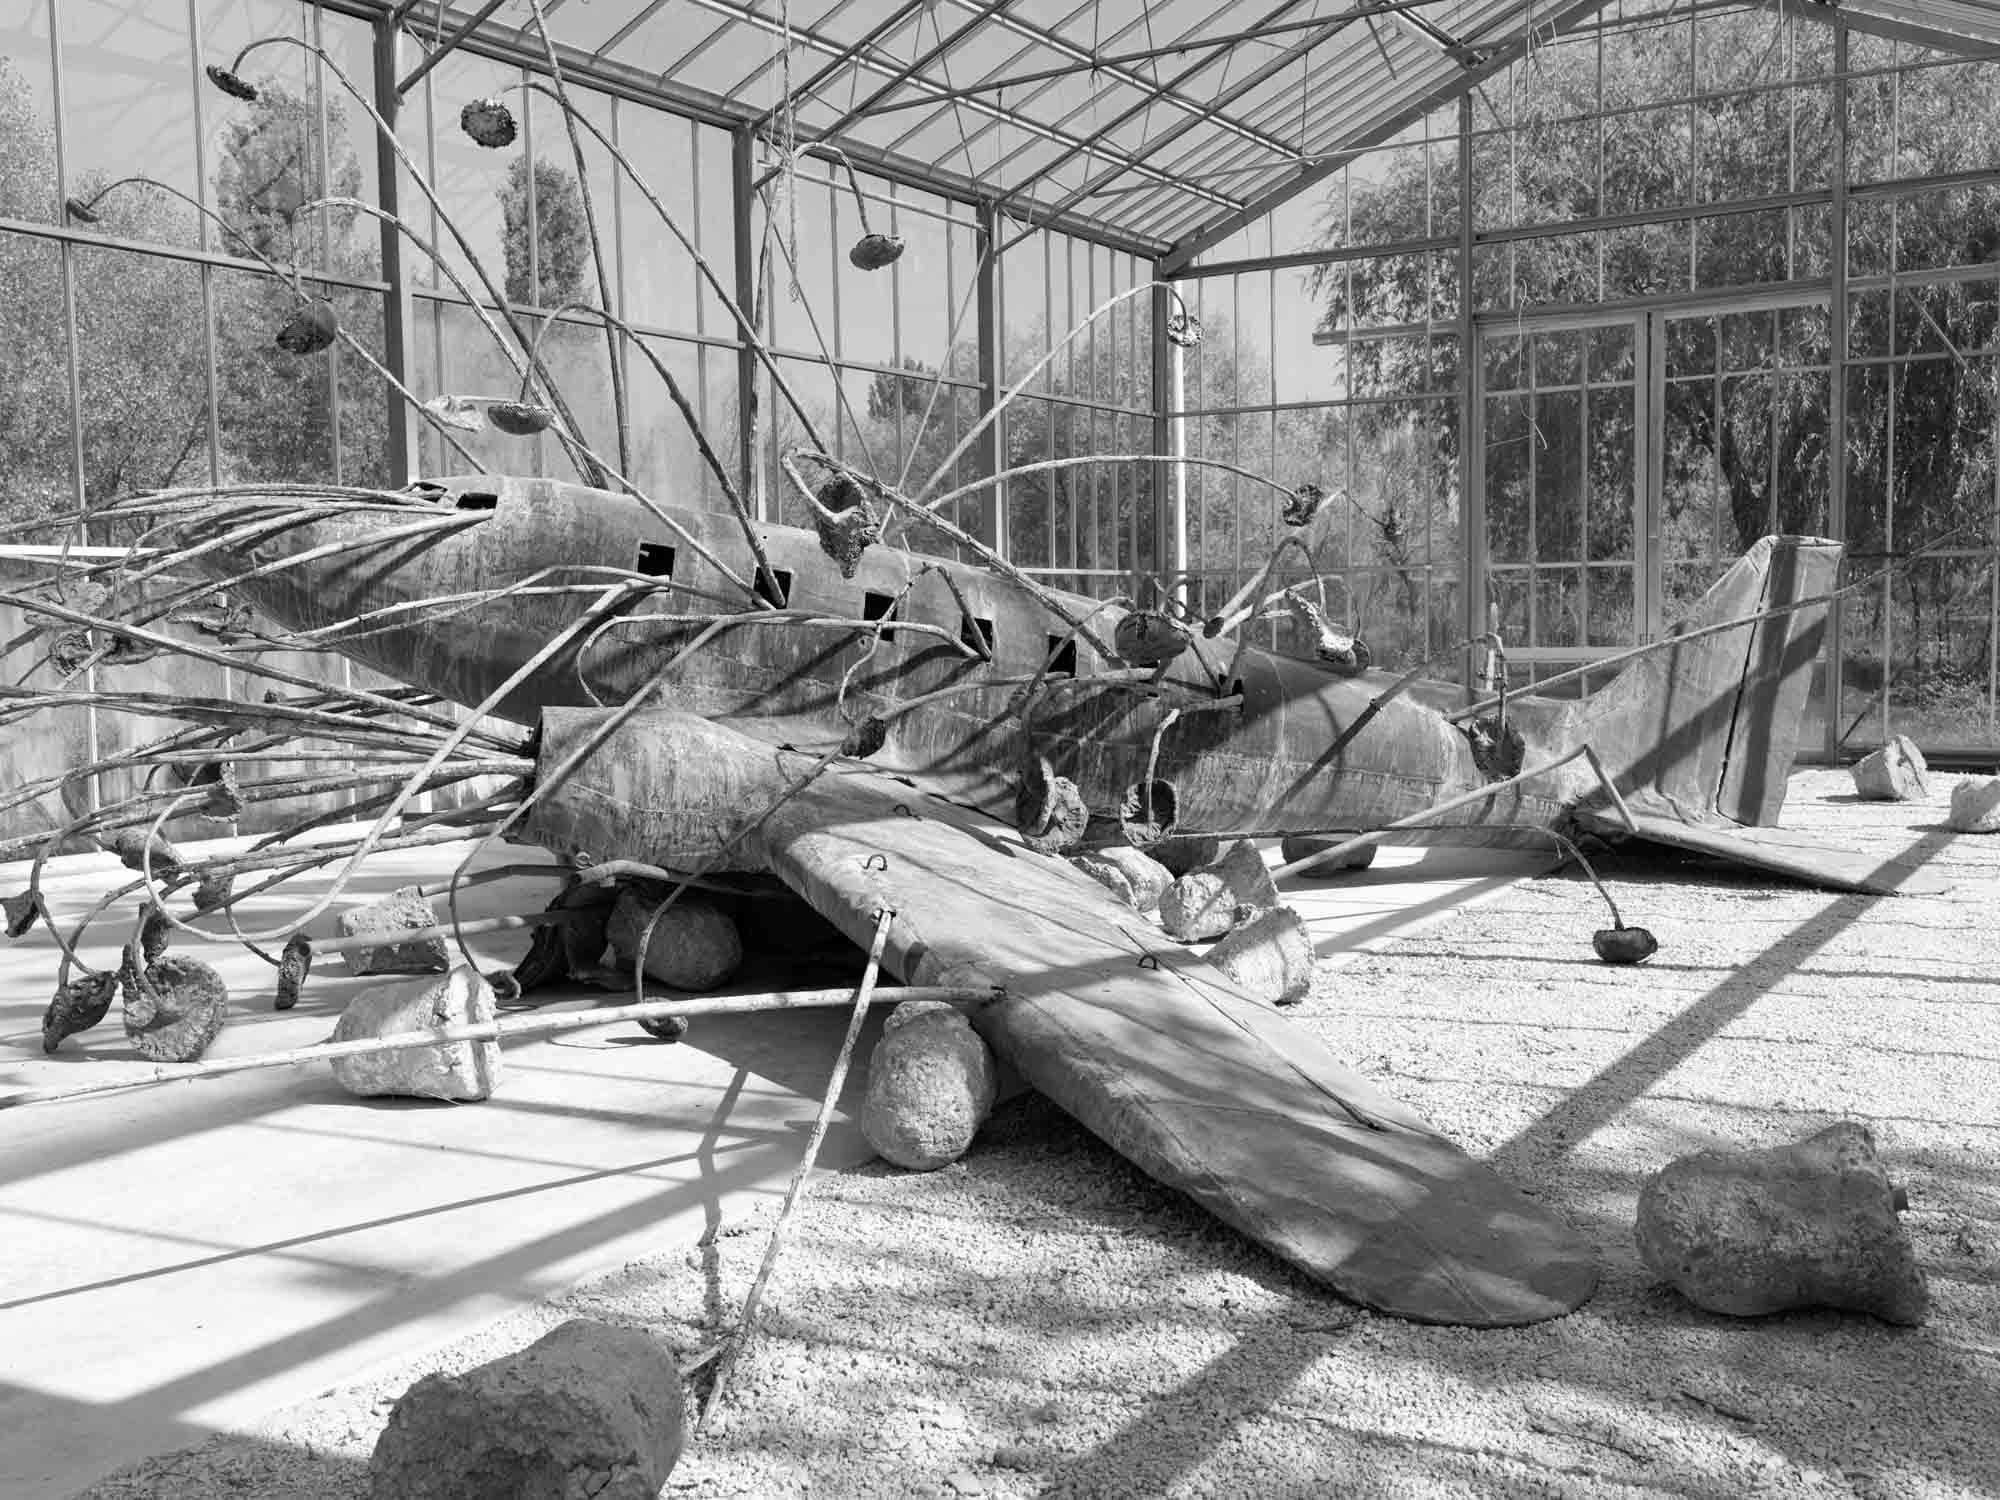 Large greenhouse with lead plane sculpture